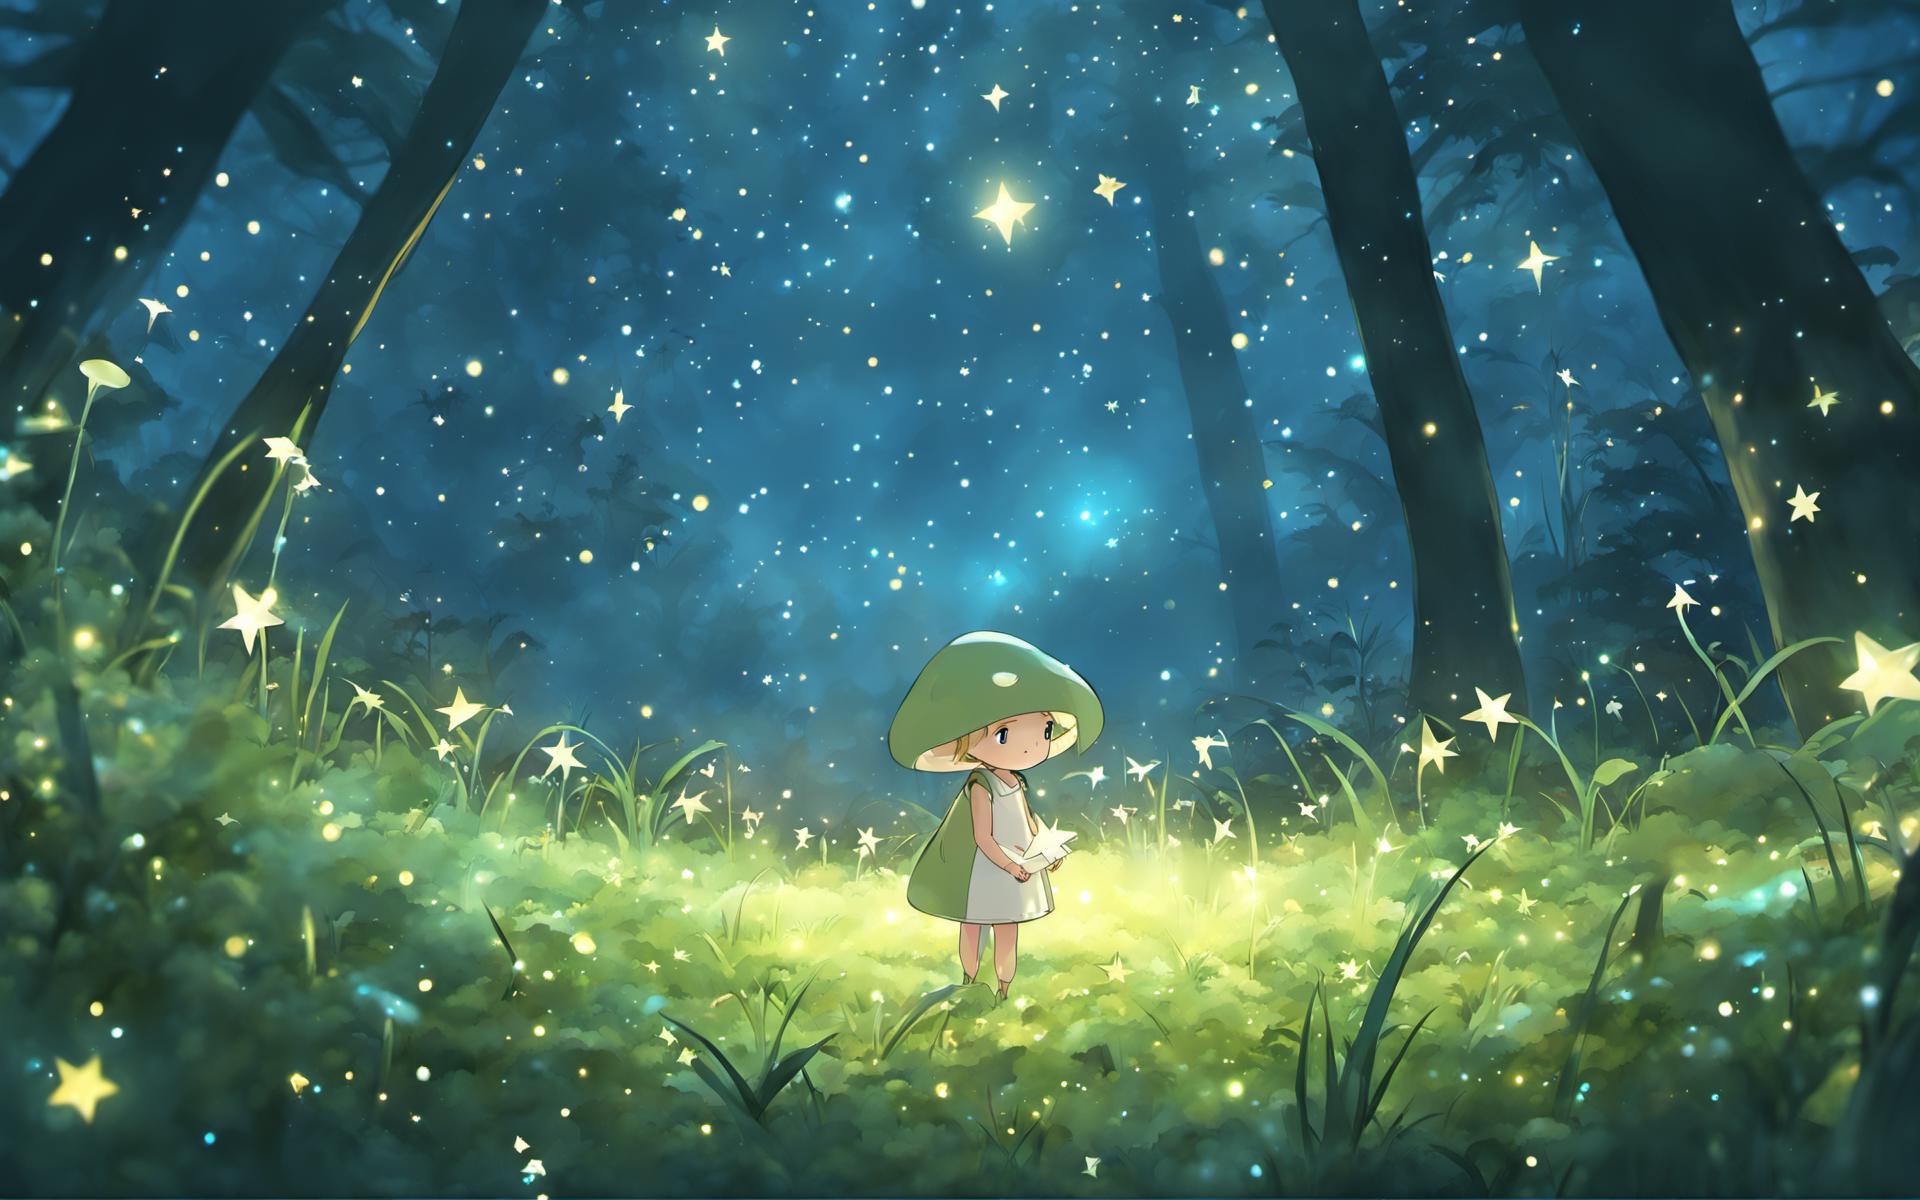 A small girl with a green hood and dress stands in a grassy clearing in a forest, surrounded by glowing stars. - My Neighbor Totoro